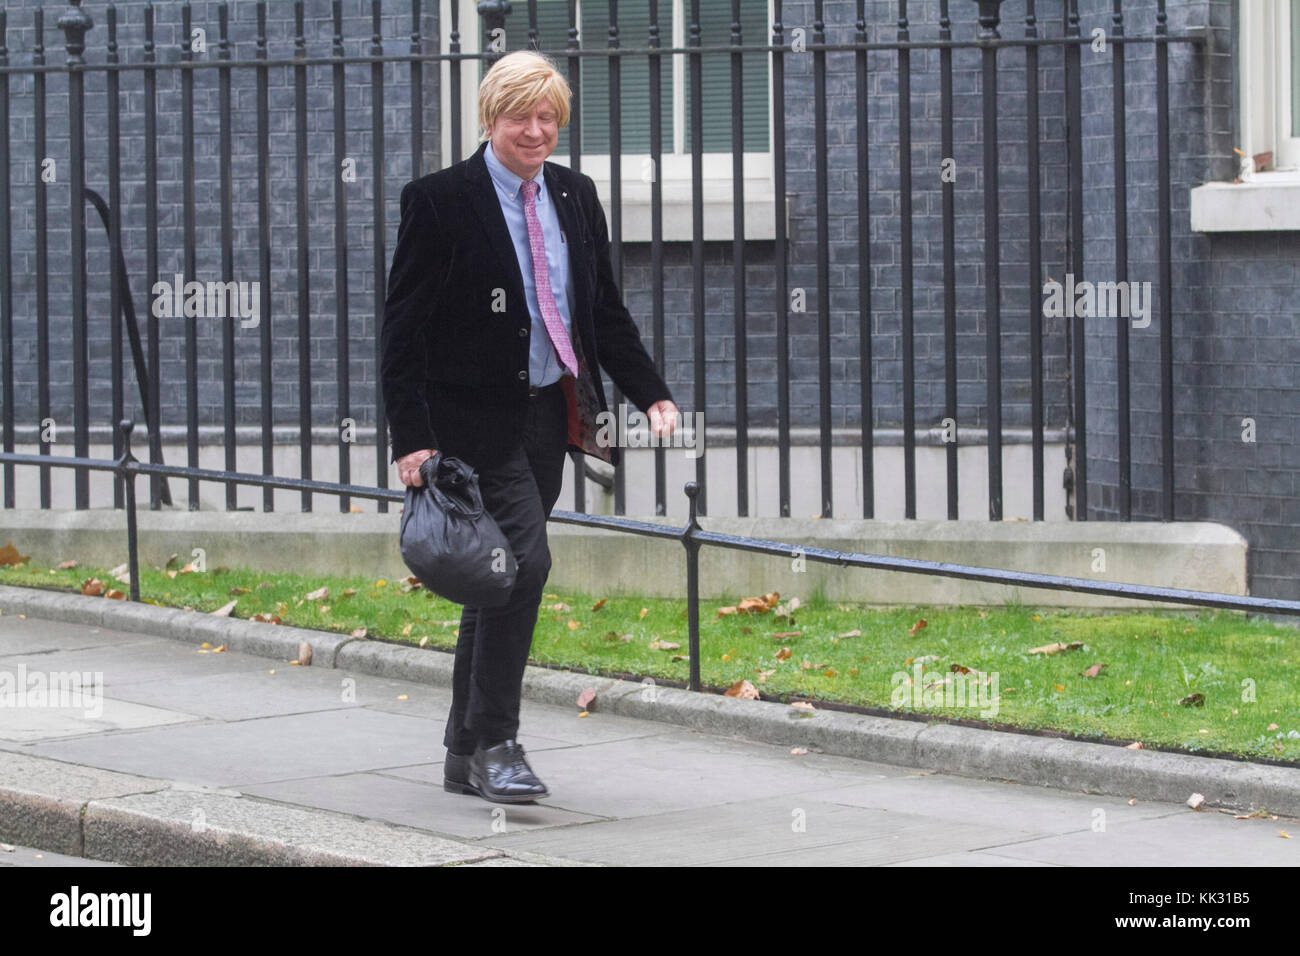 London,UK. 29th November 2017. British Conservative Politician Michael Fabricant arrives in Downing Street. Michael Fabricant is Member of Parliament for Lichfield in Staffordshire England Credit: amer ghazzal/Alamy Live News Stock Photo